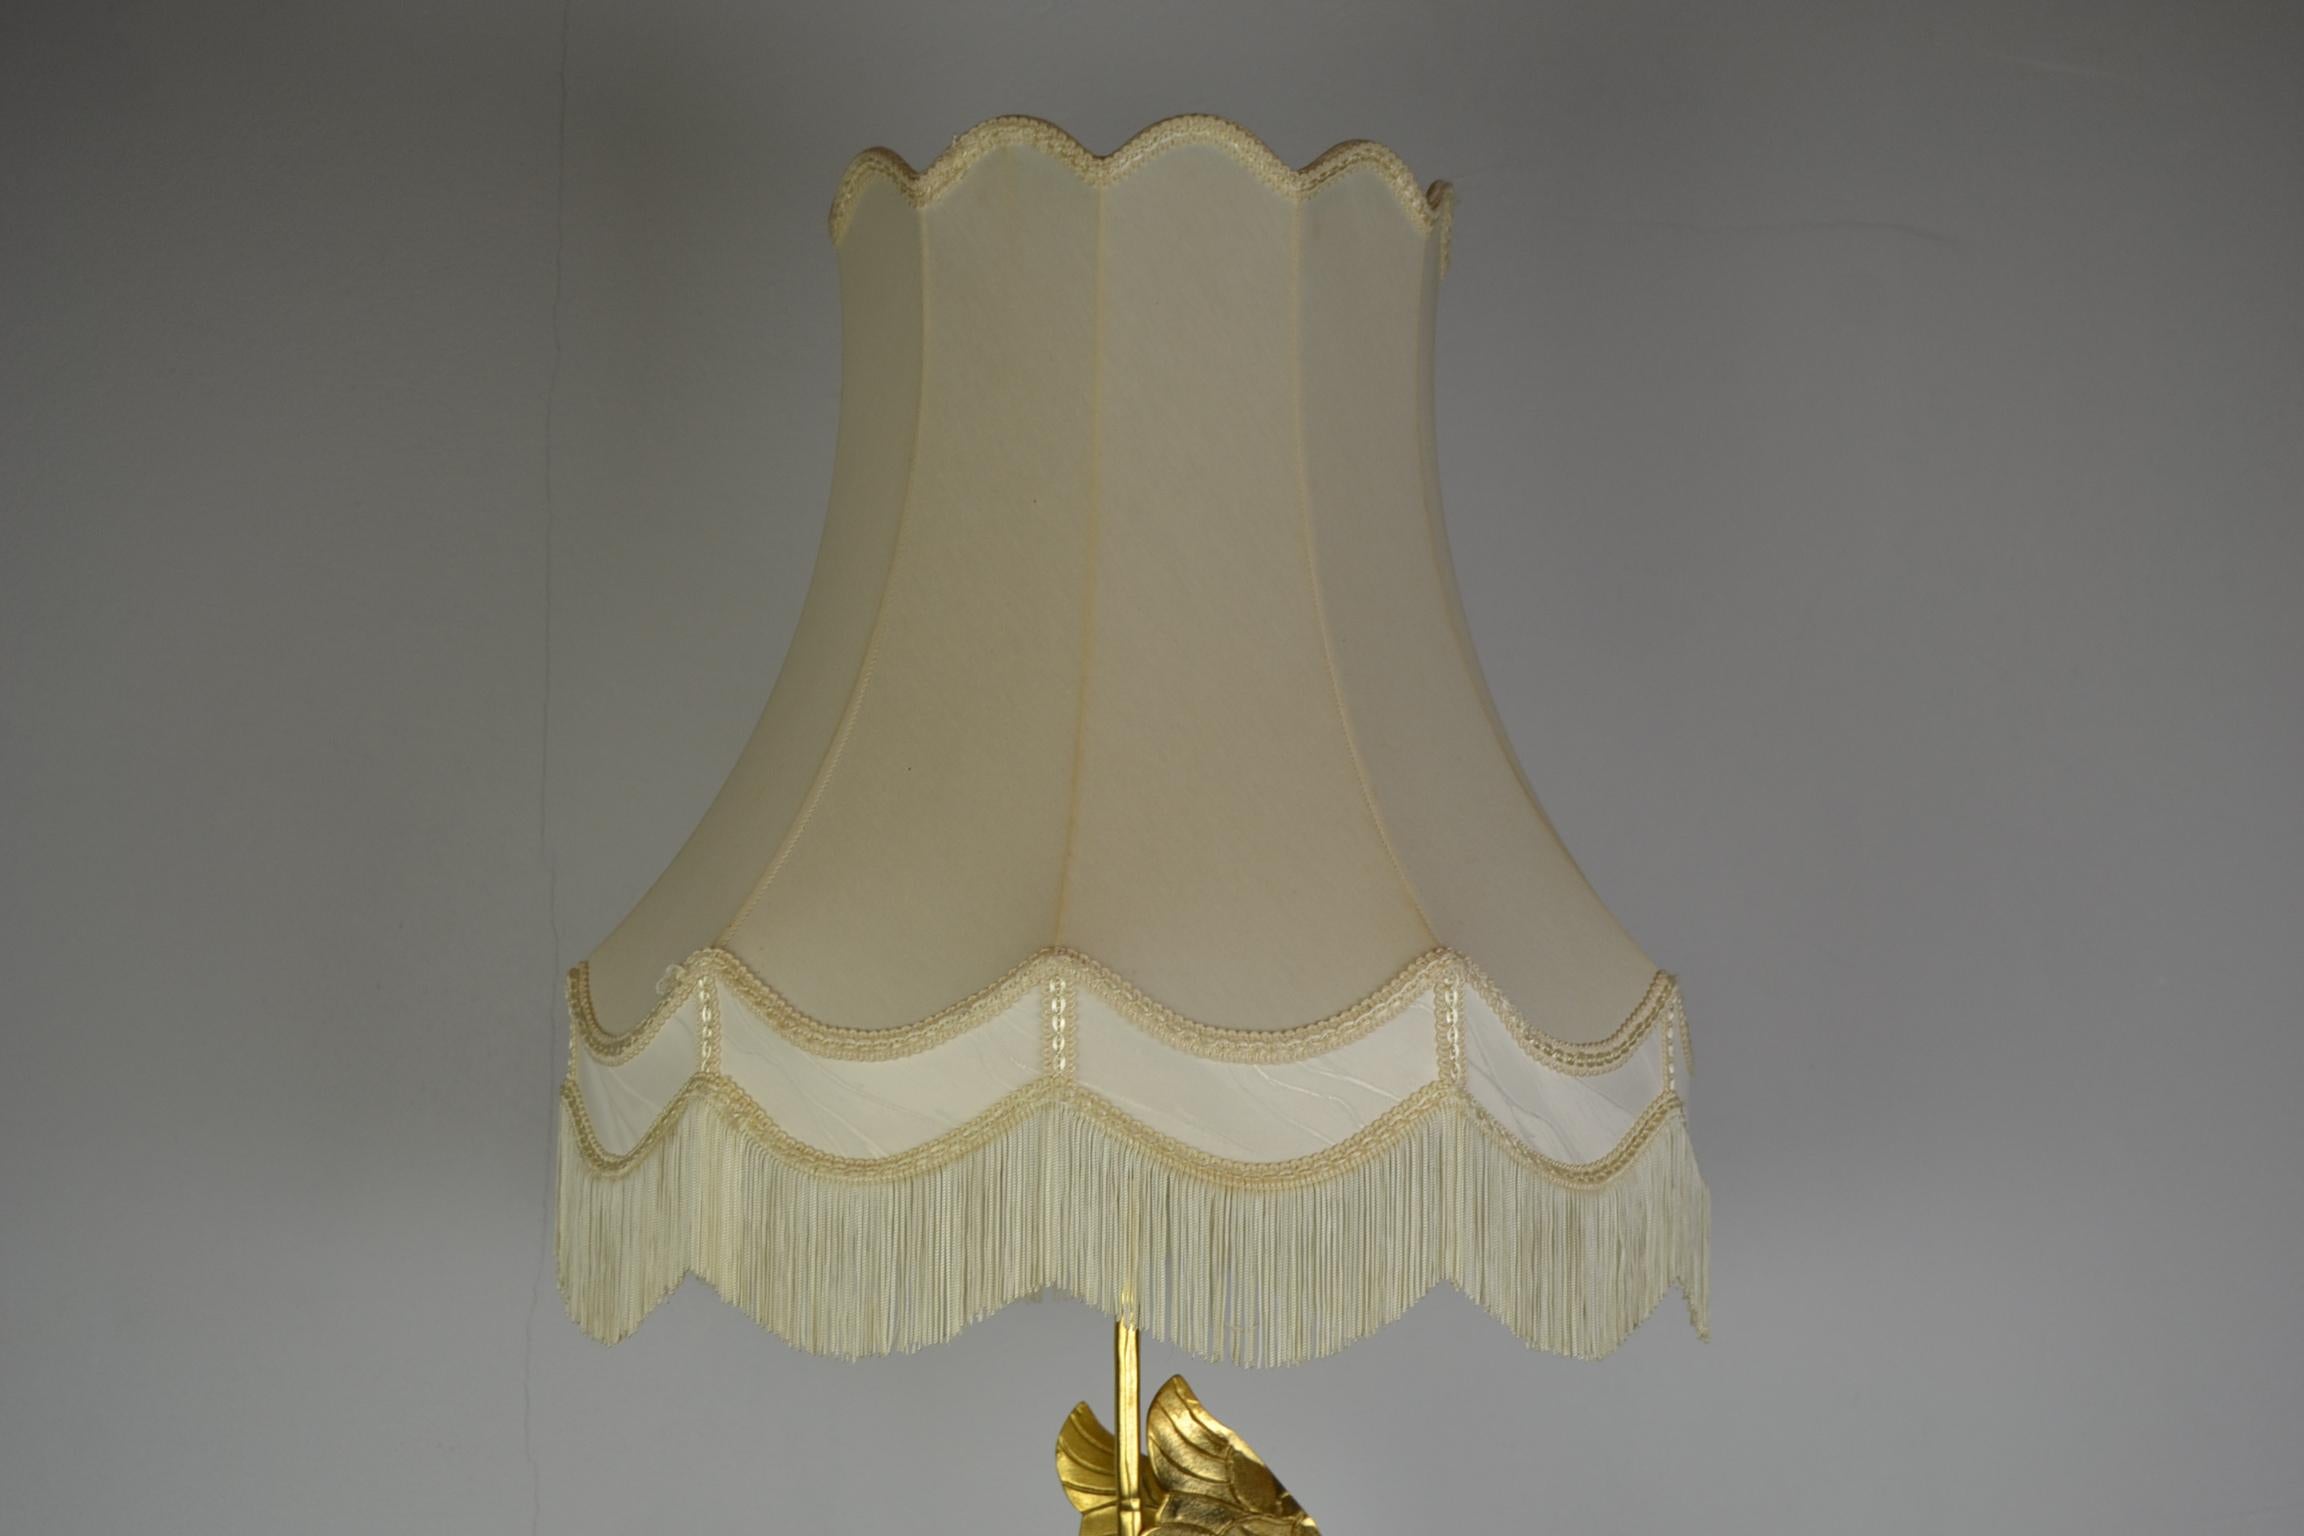 Large Lanciotto Galeotti Peacock Table Lamp for L'Originale, Italy, 1970s For Sale 6